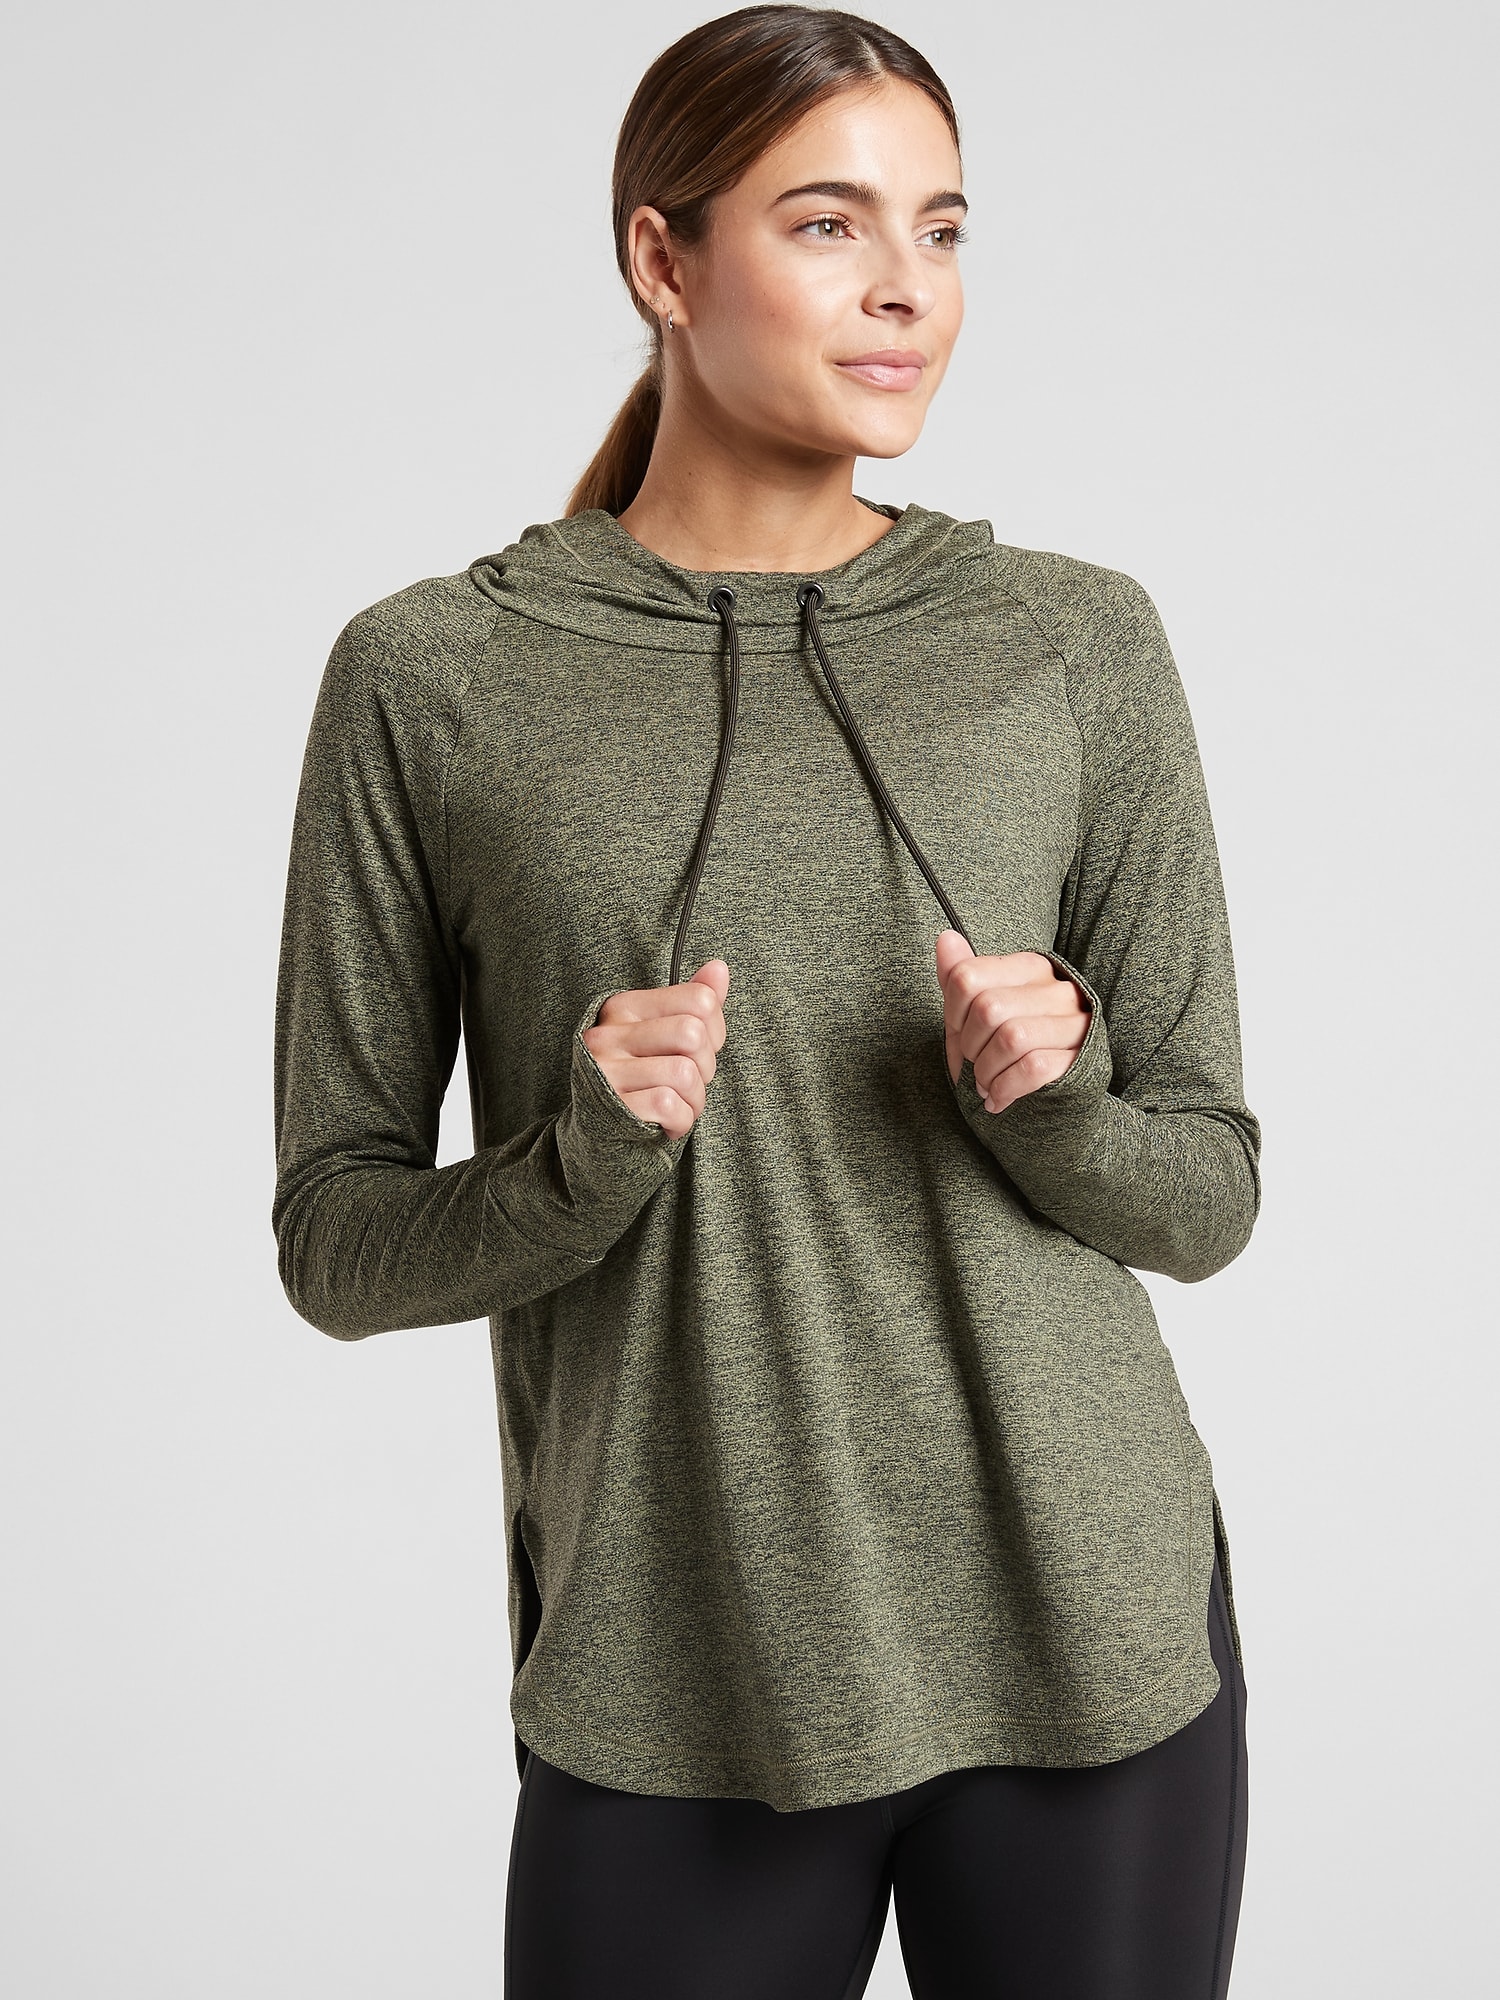 Athleta Gray Funnel Neck Pullover Sweatshirt With Thumbholes Size Small